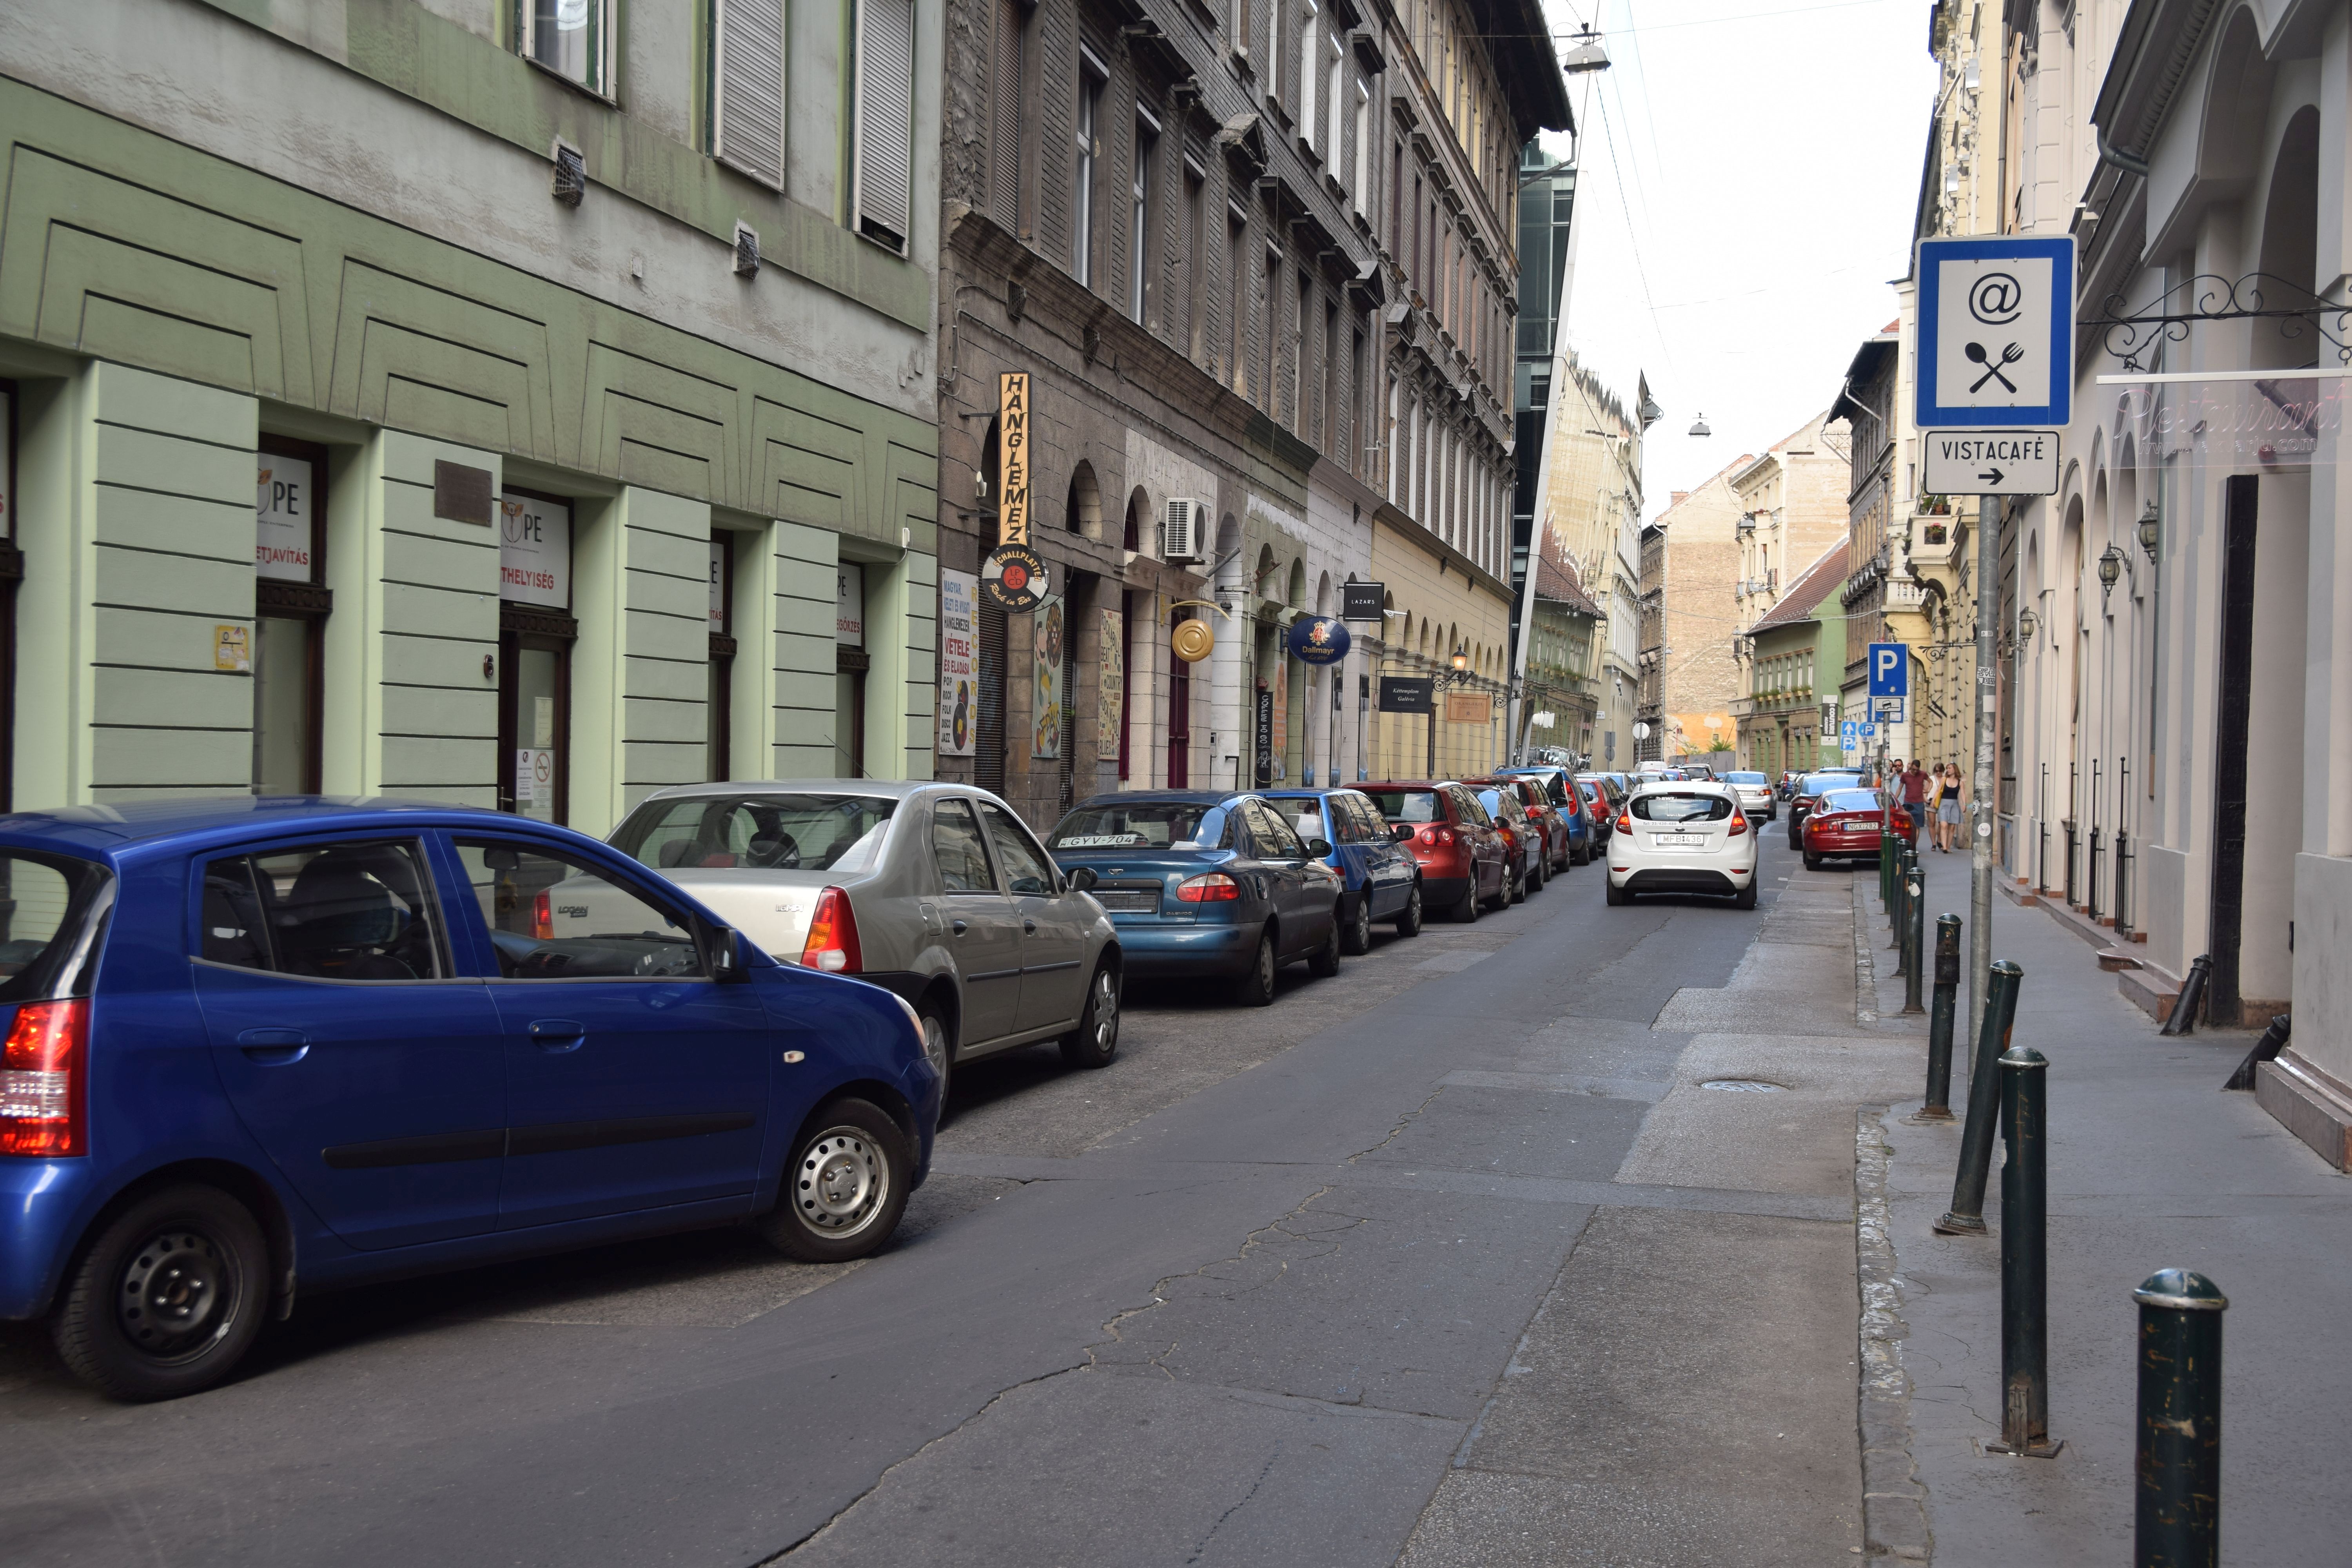 Parking in downtown Budapest is a real challenge.